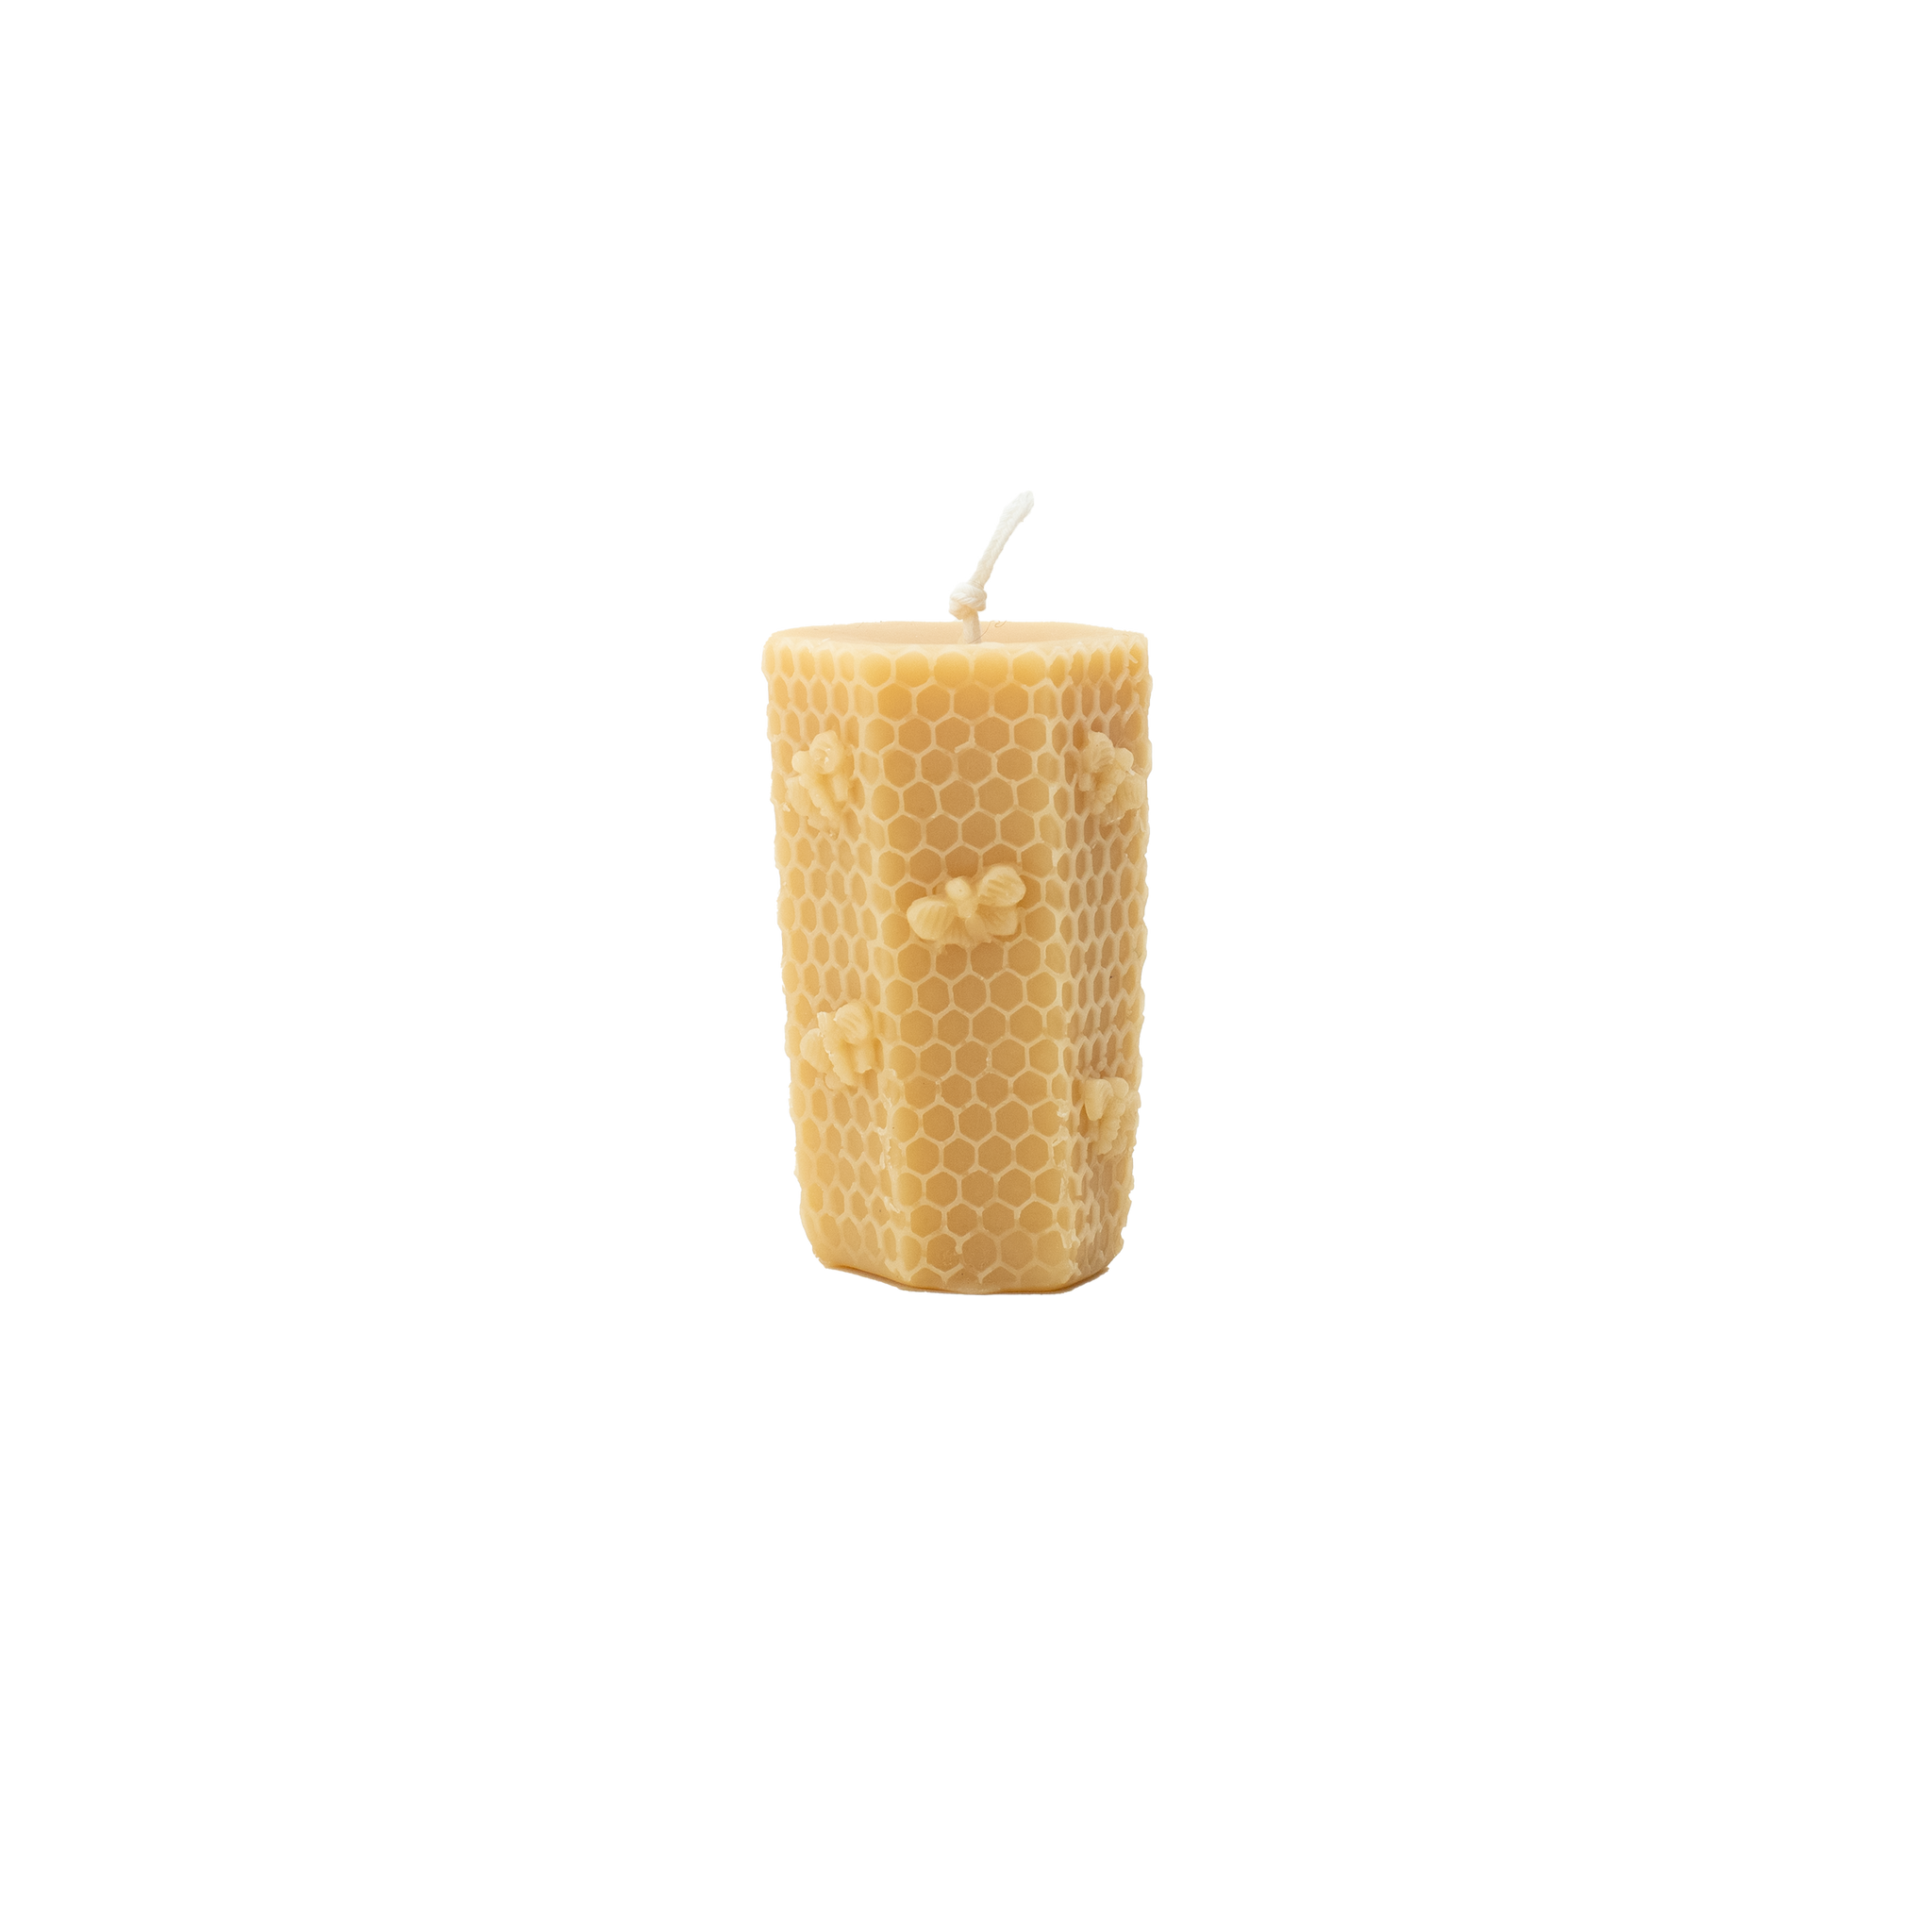 Product photo of the Organic Beeswax Beehive Candle from our Bring it for the Bees Collection